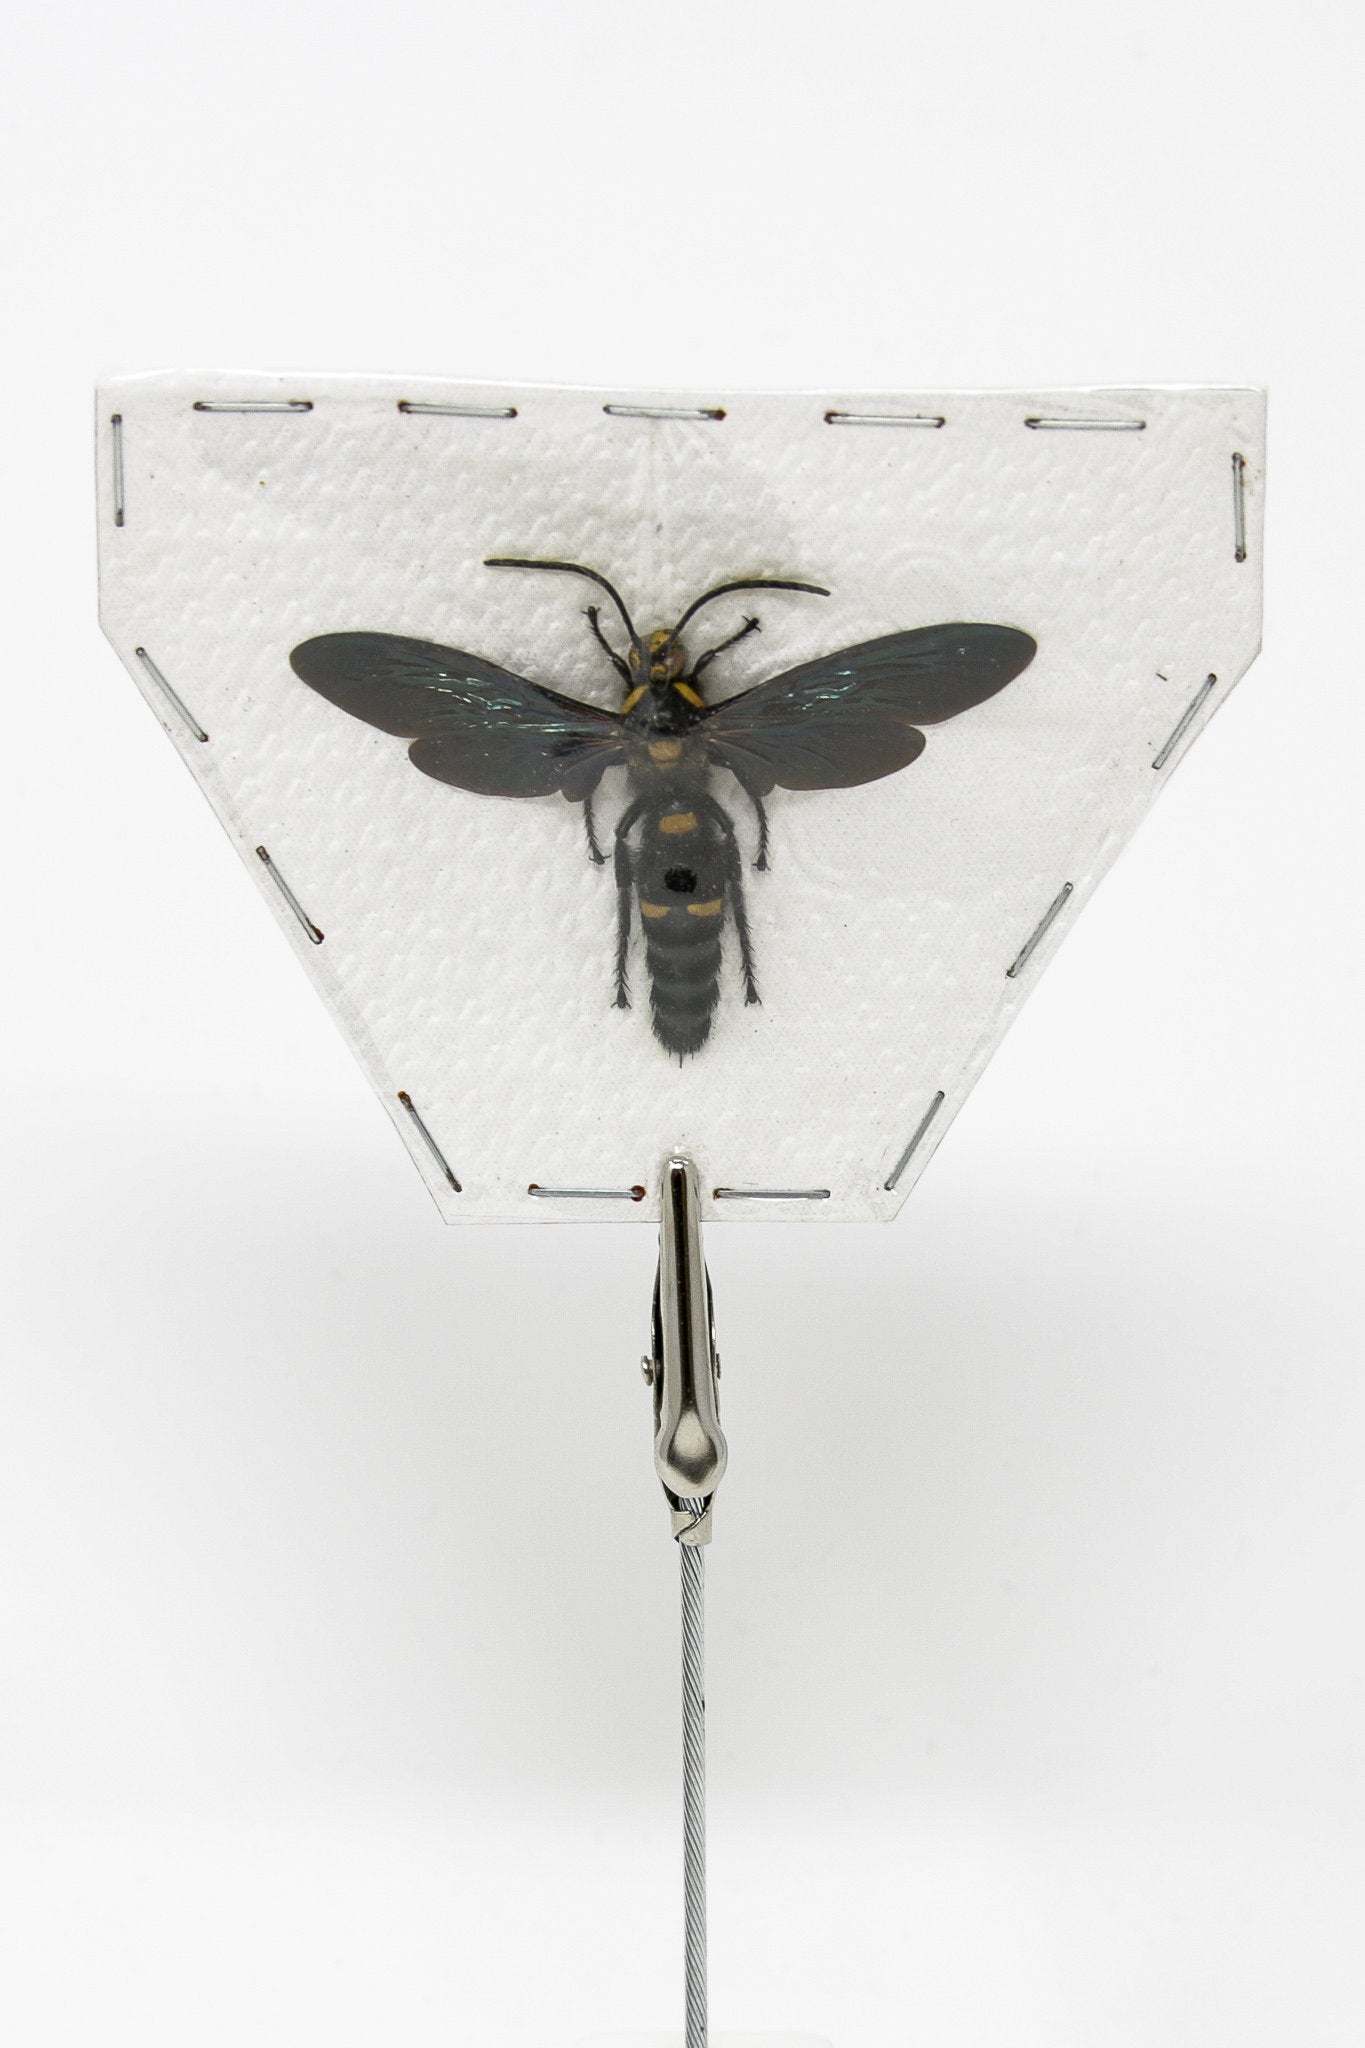 2 x Megascolia species | Giant Scoliid Wasp 2.5-3 Inch Wingspan | A1 Unmounted Specimen